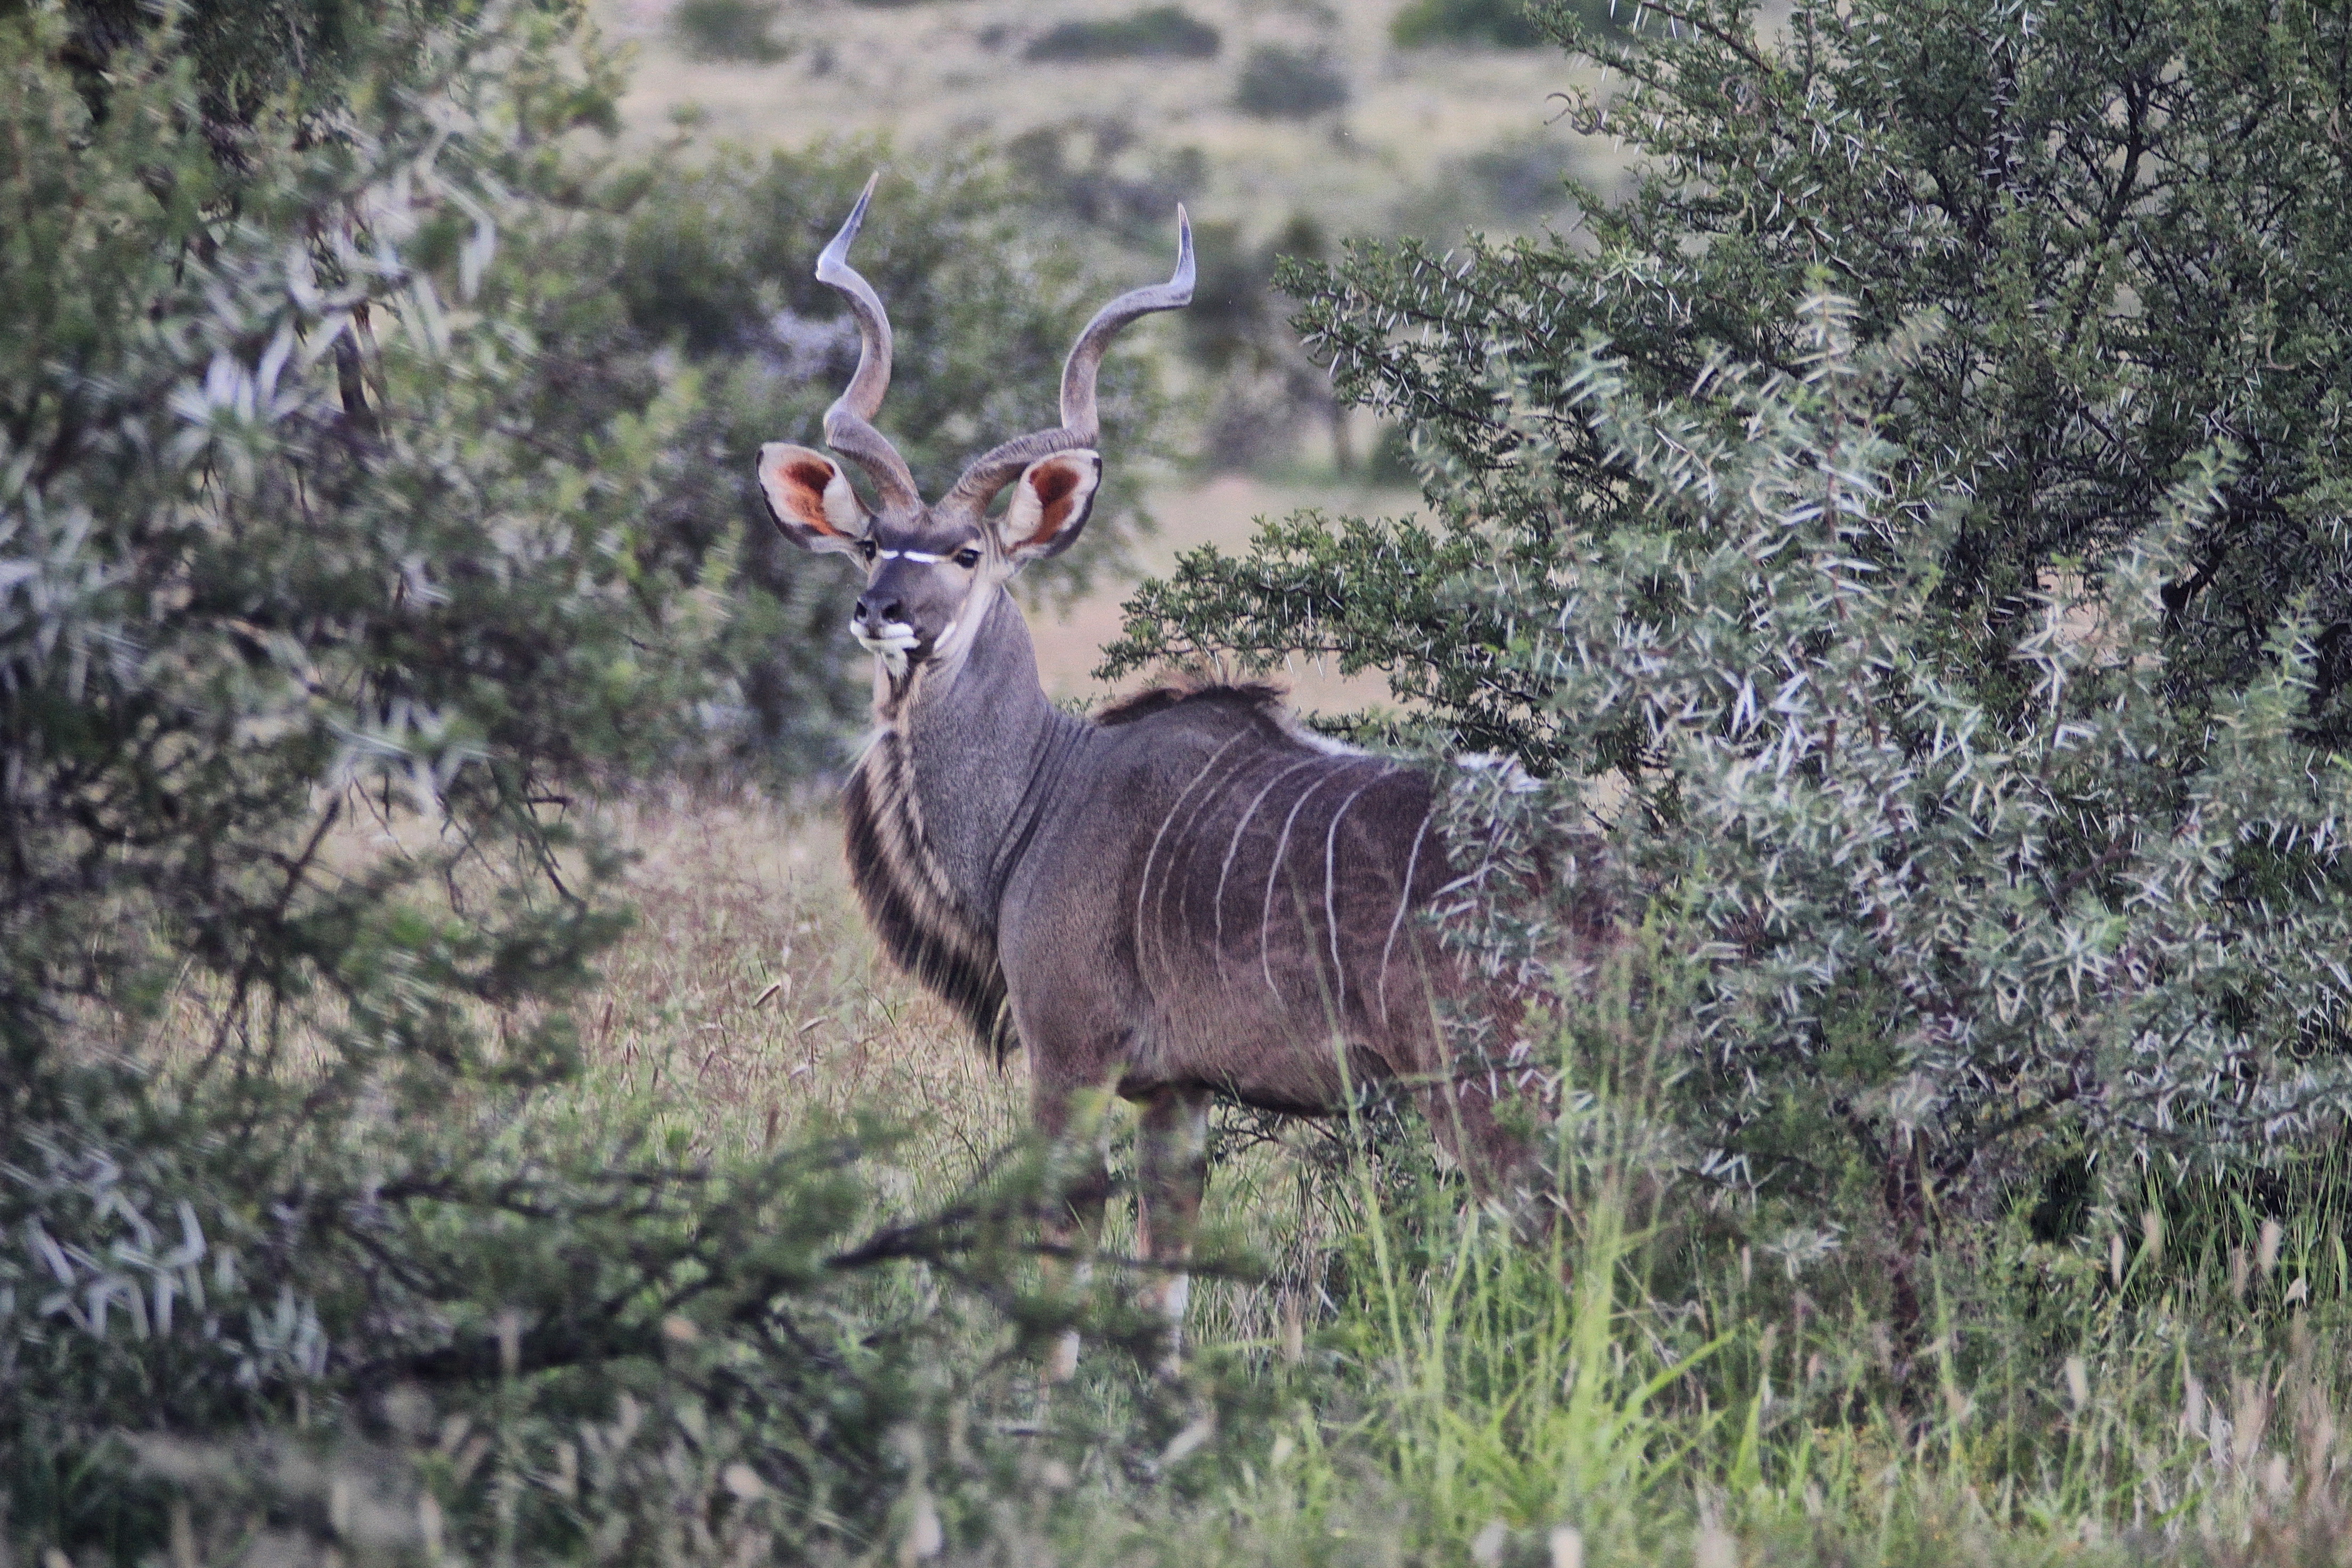 In the past few decades, increasing numbers of kudus have been seen in the thornveld north of Cradock, spreading up from their old stronghold of valley bushveld in the south. 